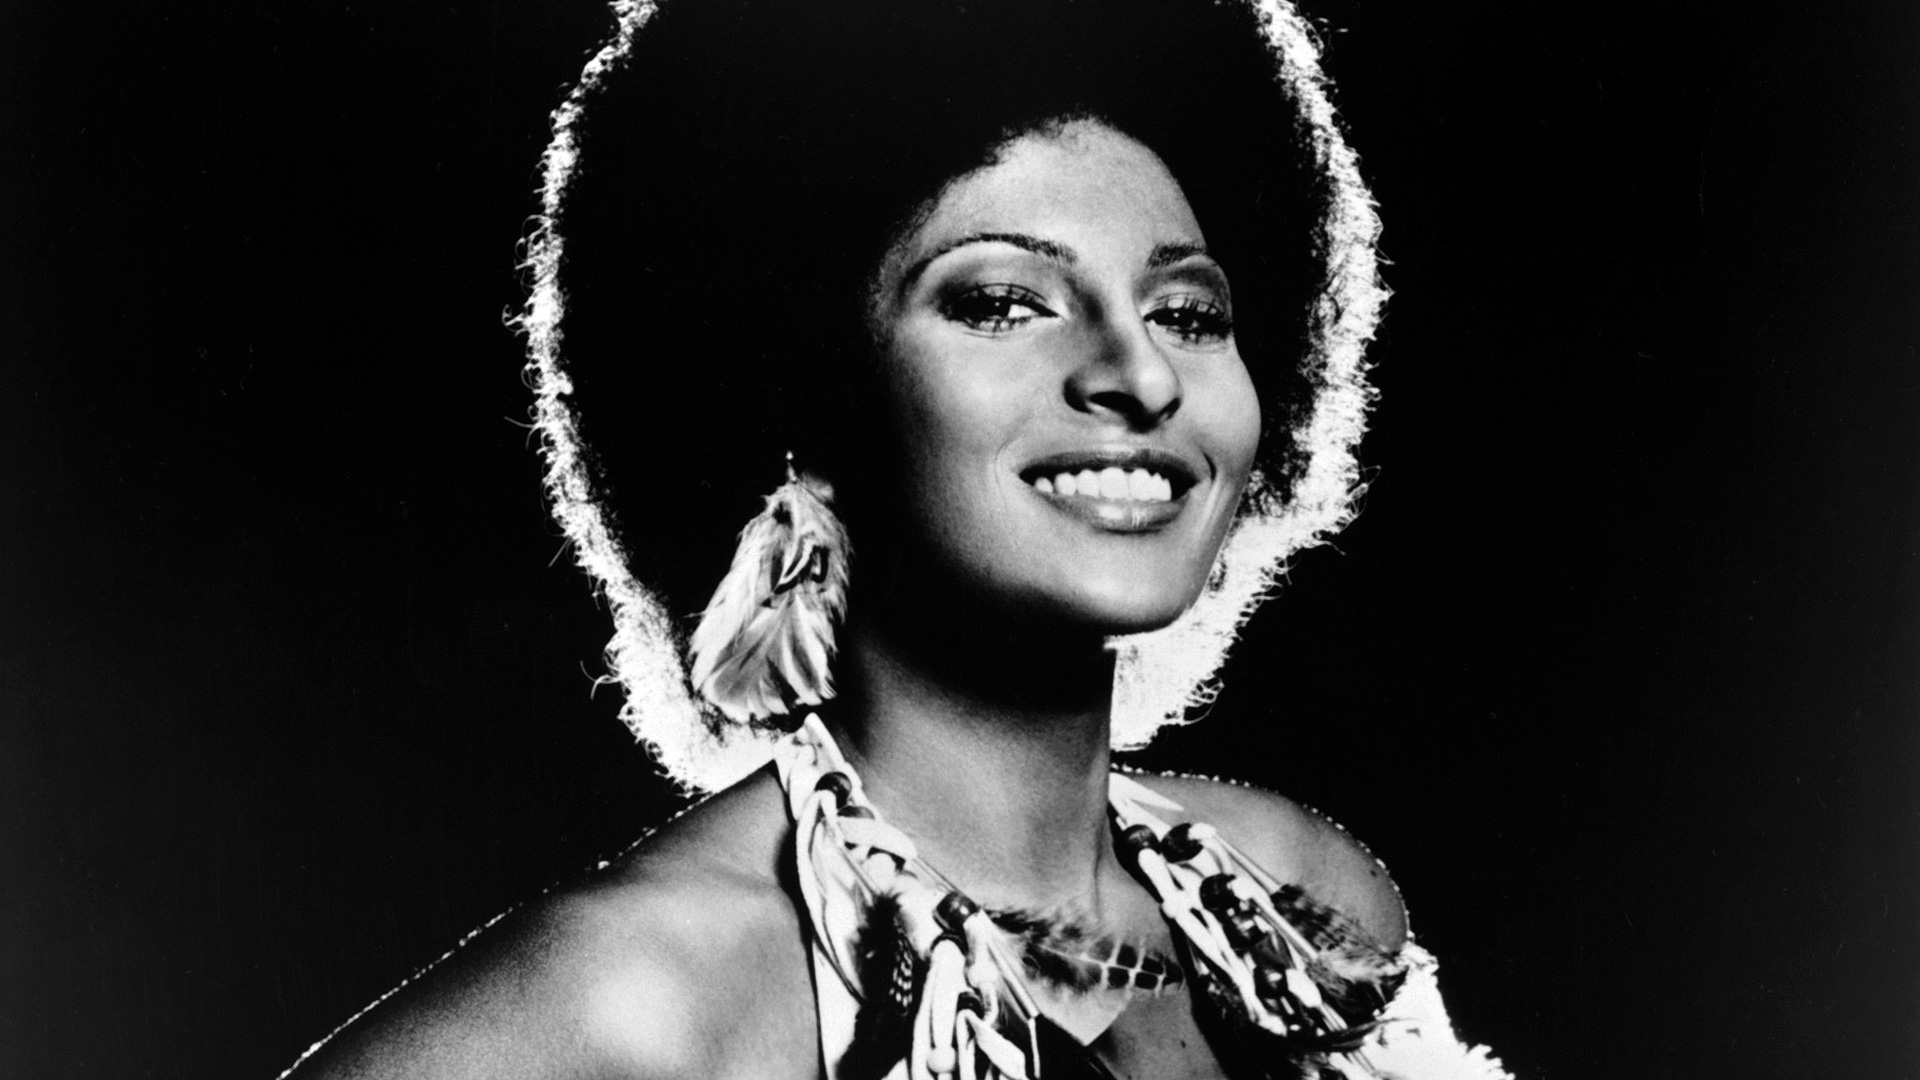 April 5, 1974: “Foxy Brown” Starring Pam Grier Was Released